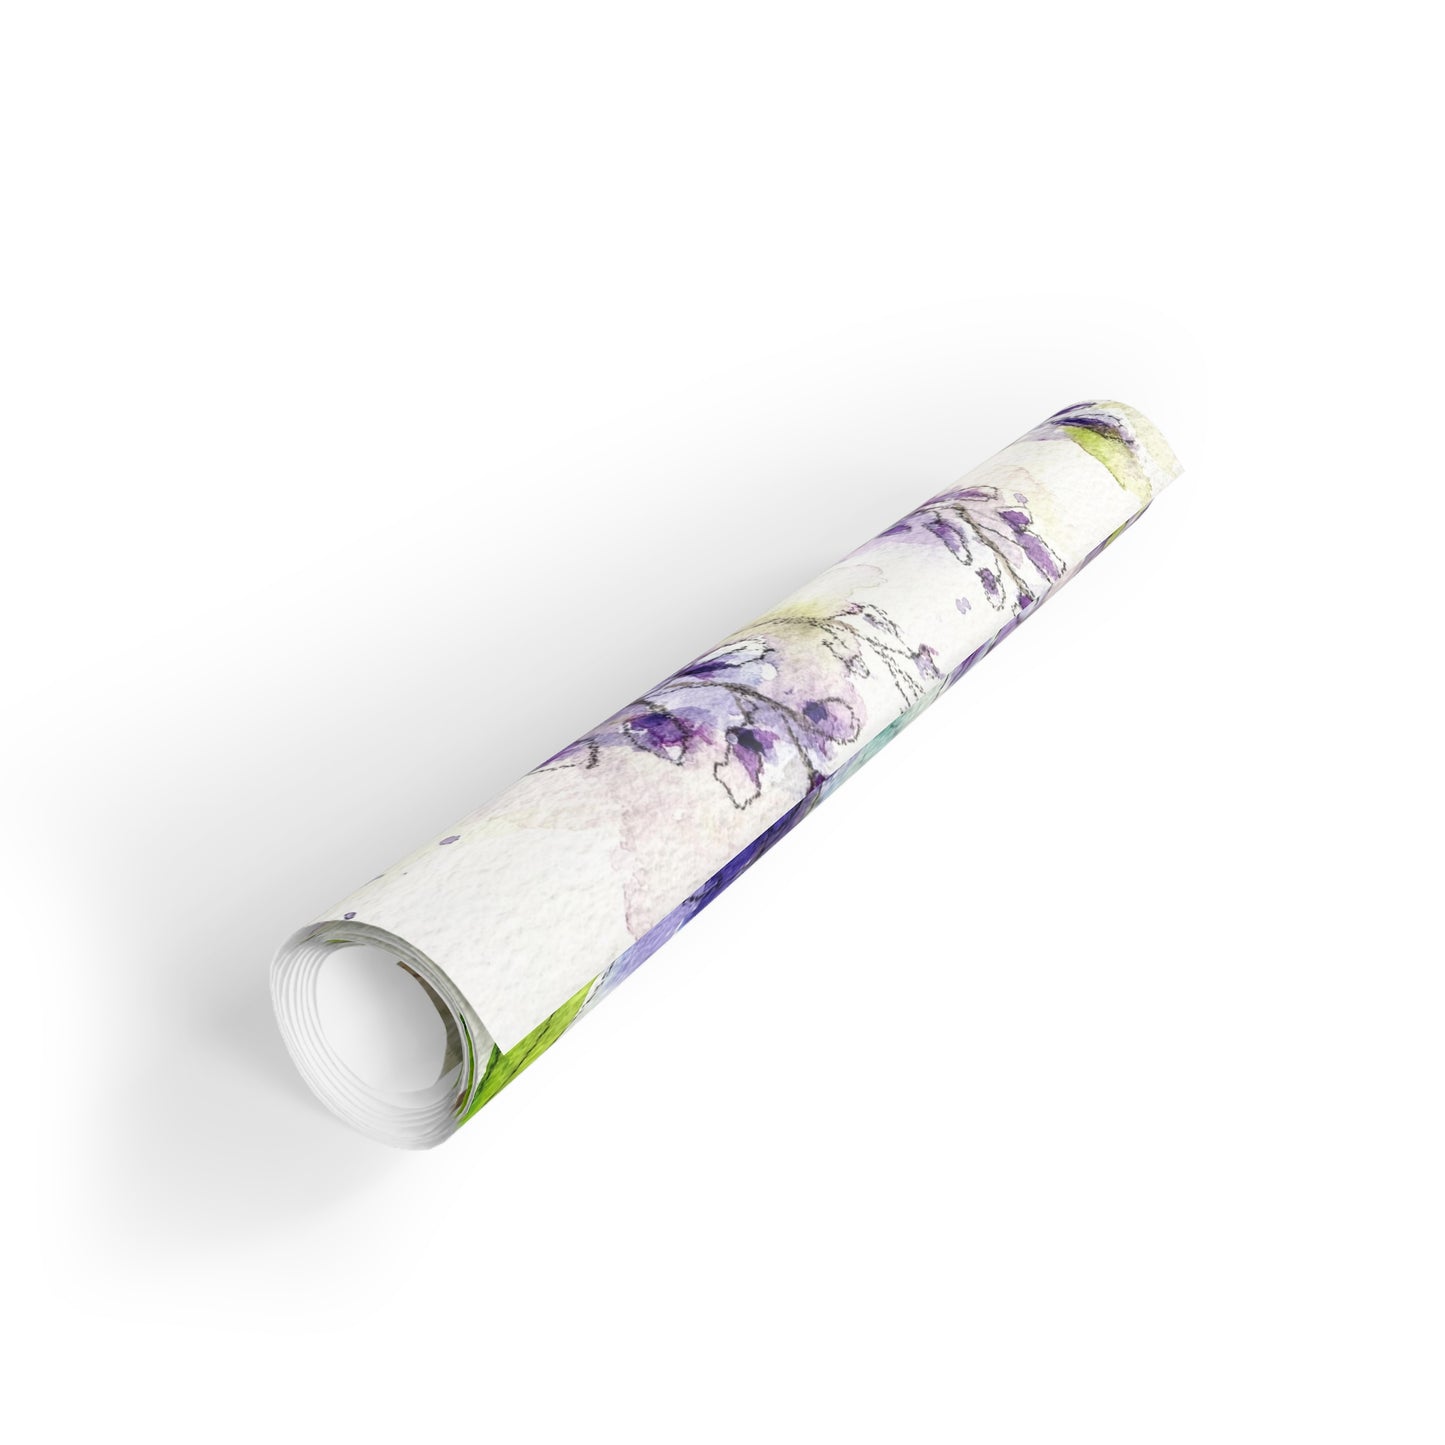 Roxy Rich Loose Floral Watercolor Wisteria painting printed Gift Wrapping Paper Rolls, 1pc Wedding Mom Friend giftwrap